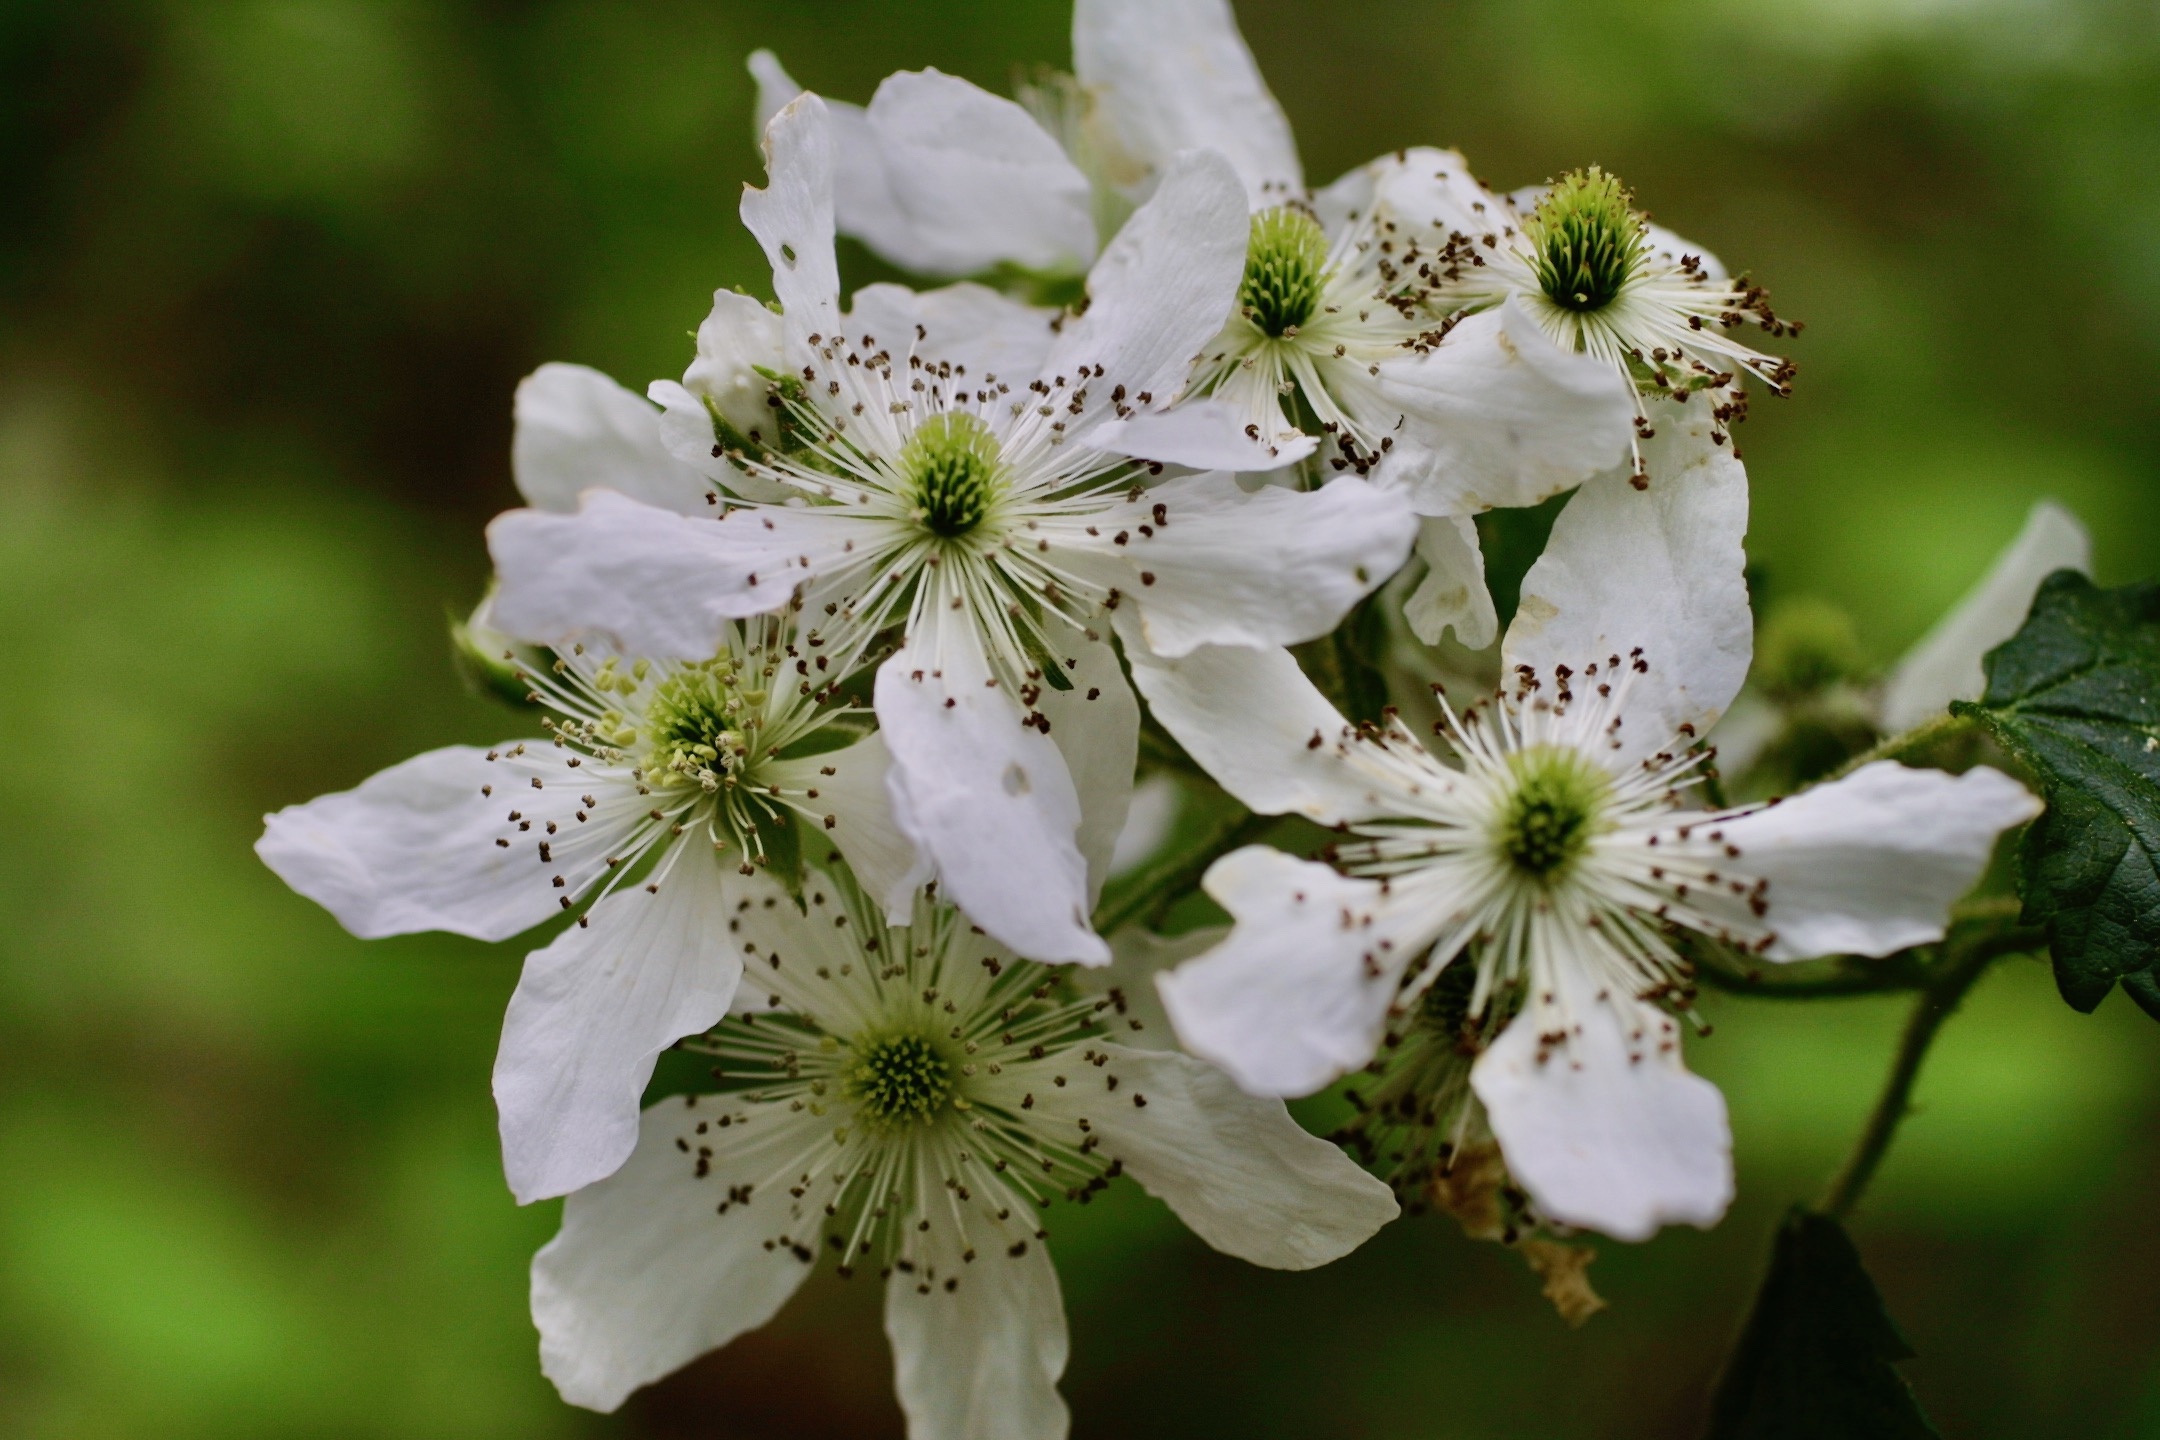 The Scientific Name is Rubus allegheniensis. You will likely hear them called Allegheny Blackberry. This picture shows the 5 petals and 5 sepals, the petals longer than the sepals of Rubus allegheniensis